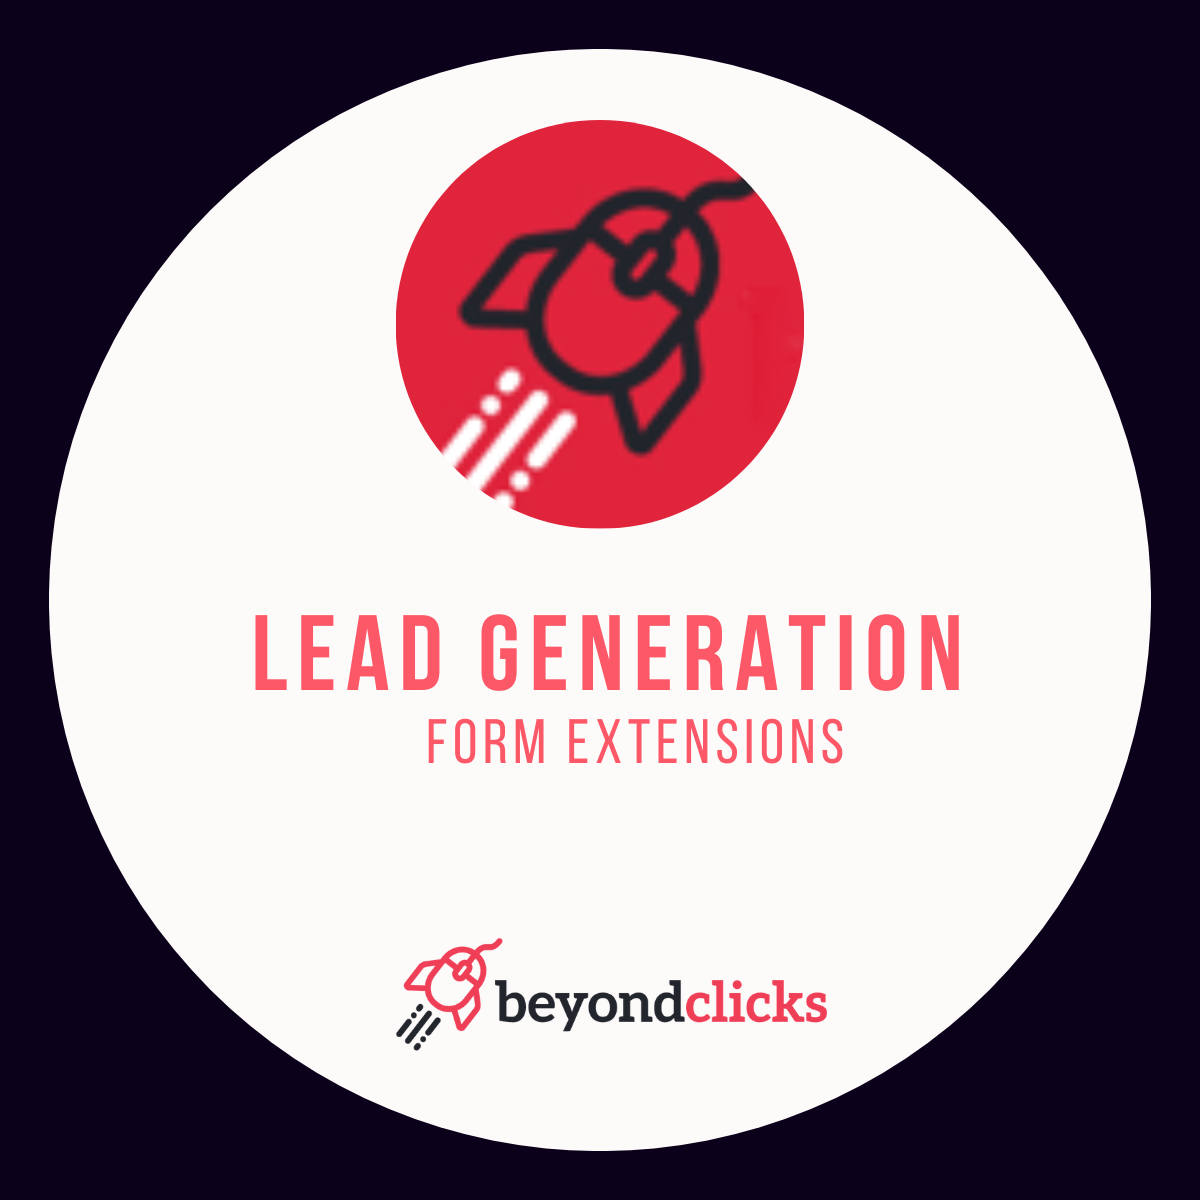 Lead Generation Extension Forms